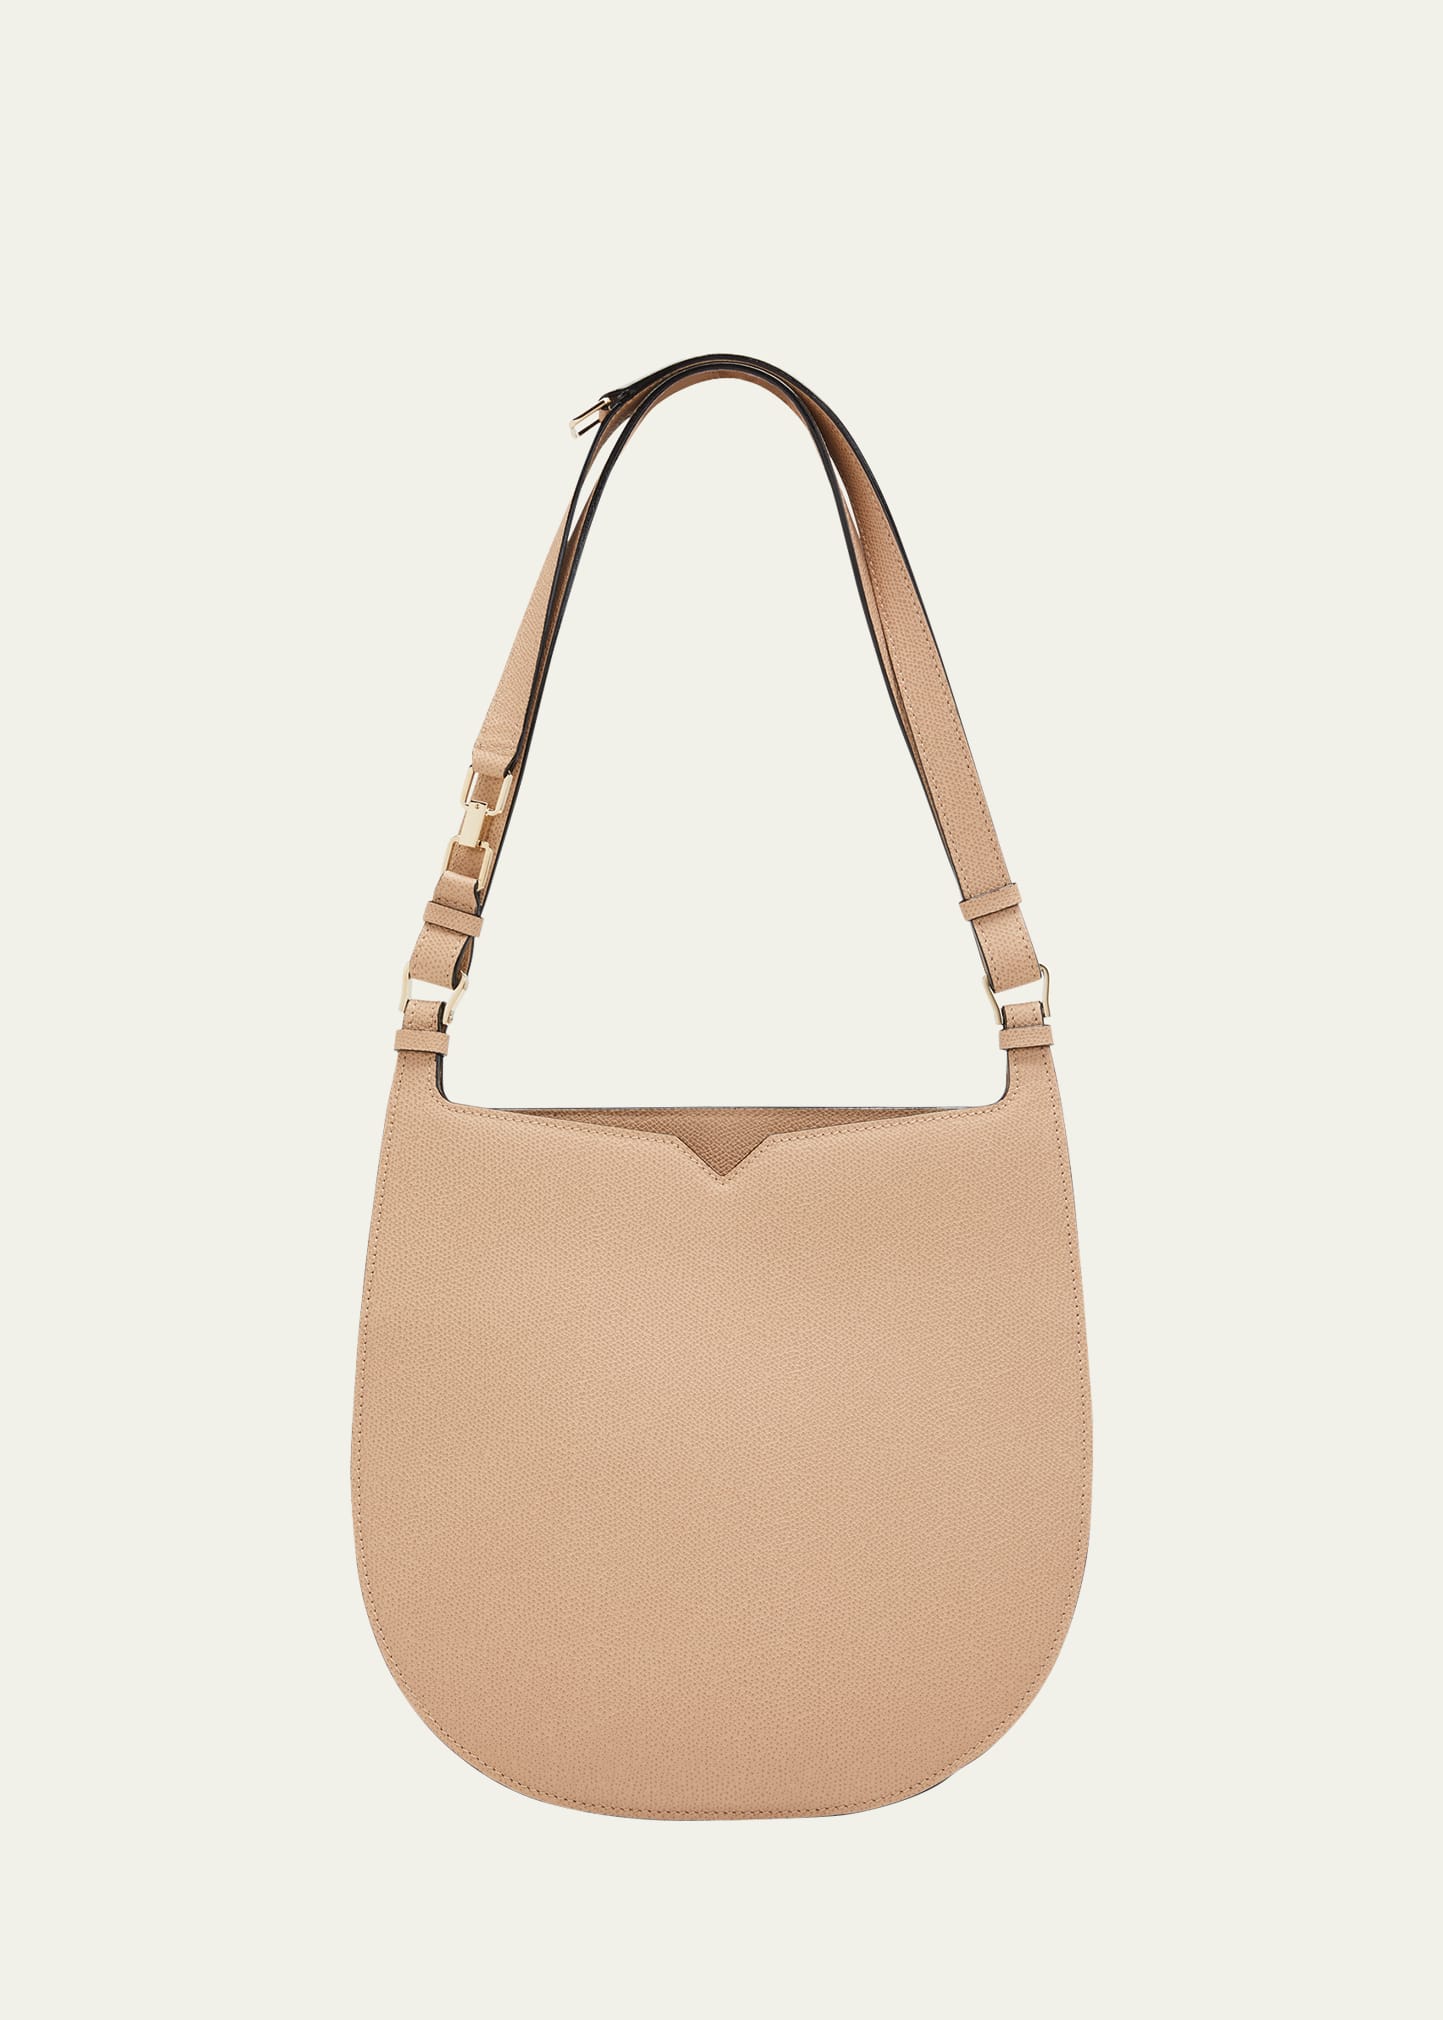 Valextra Saffiano Weekend Hobo Bag In Mbc Beige Cach